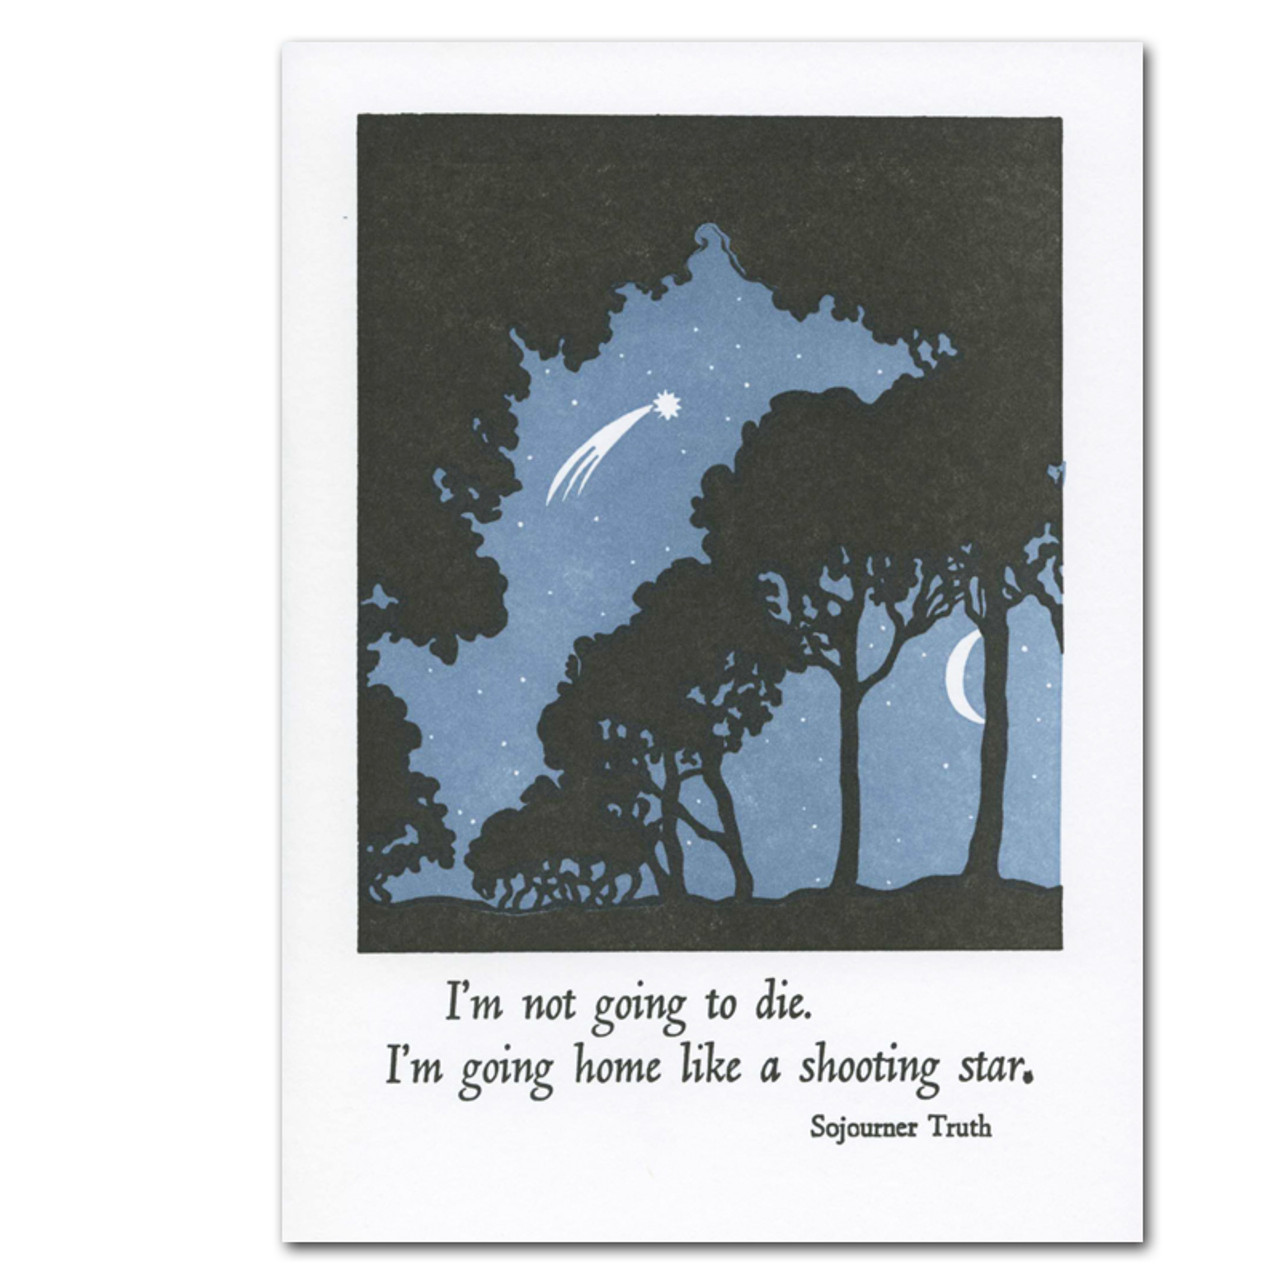 Saturn Press Letterpress Sympathy Card- Going Home is a letterpress illustration typeset by hand on recycled paper of the night sky with a shooting star viewed through treetops with a Sojourner Truth quotation- "I'm not going to die, I'm going home like a shooting star".